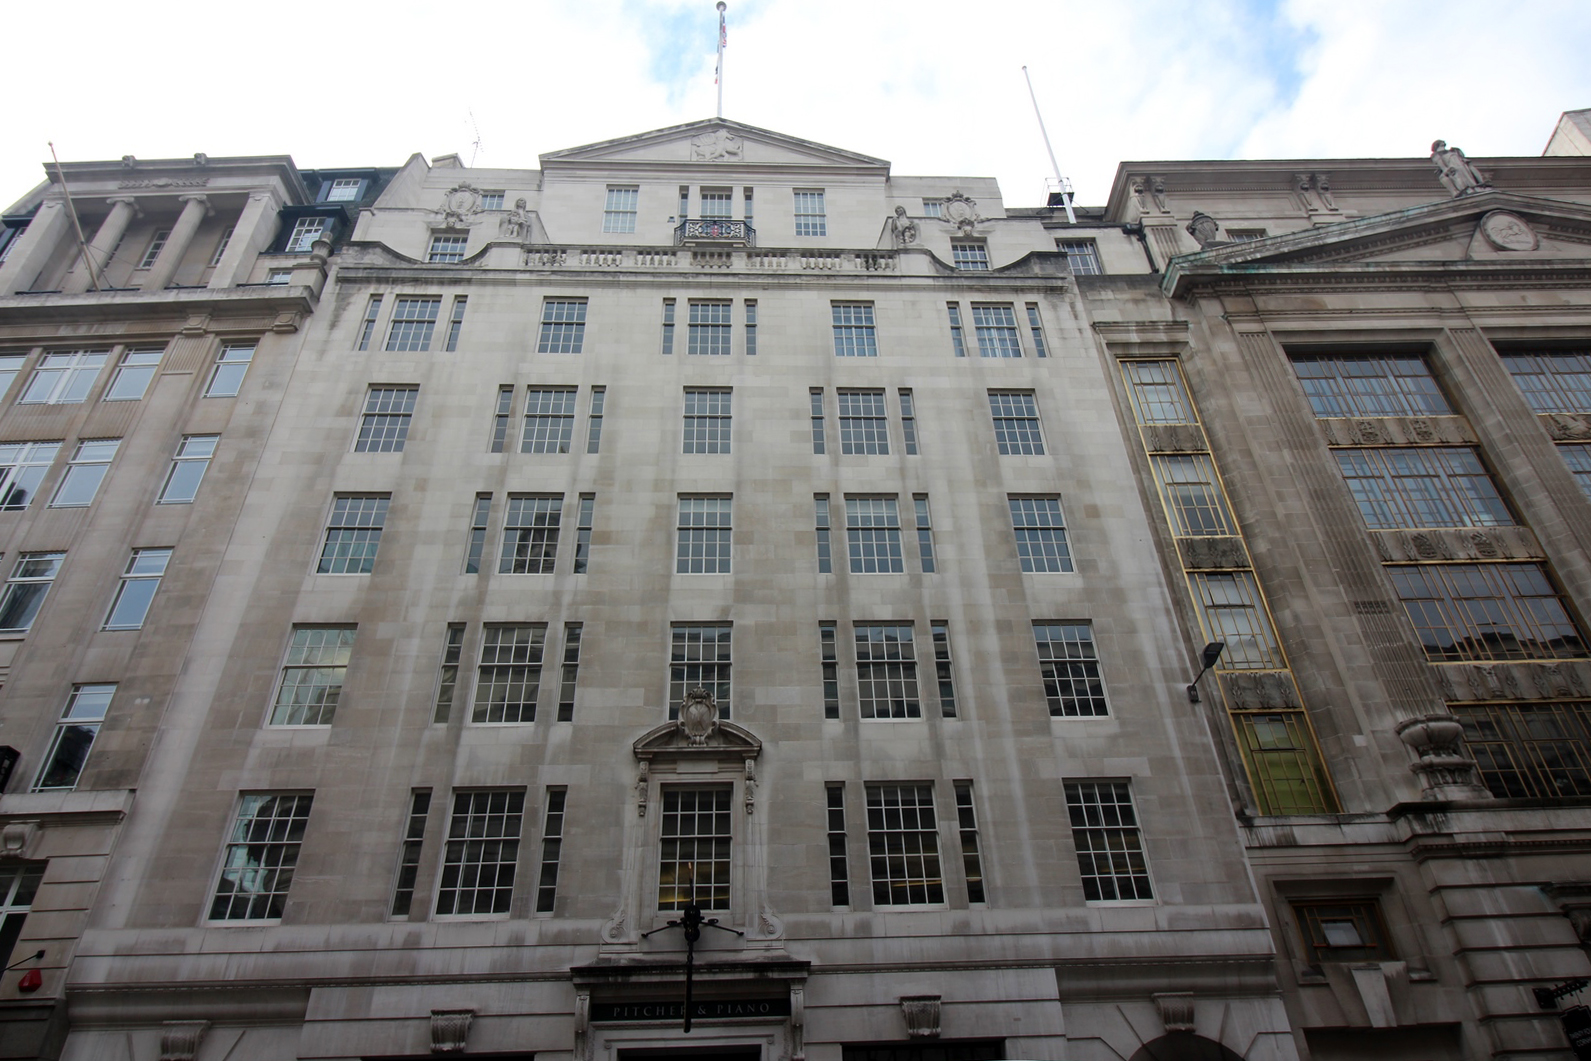 A nine-storey building made of Portland stone with five windows across.